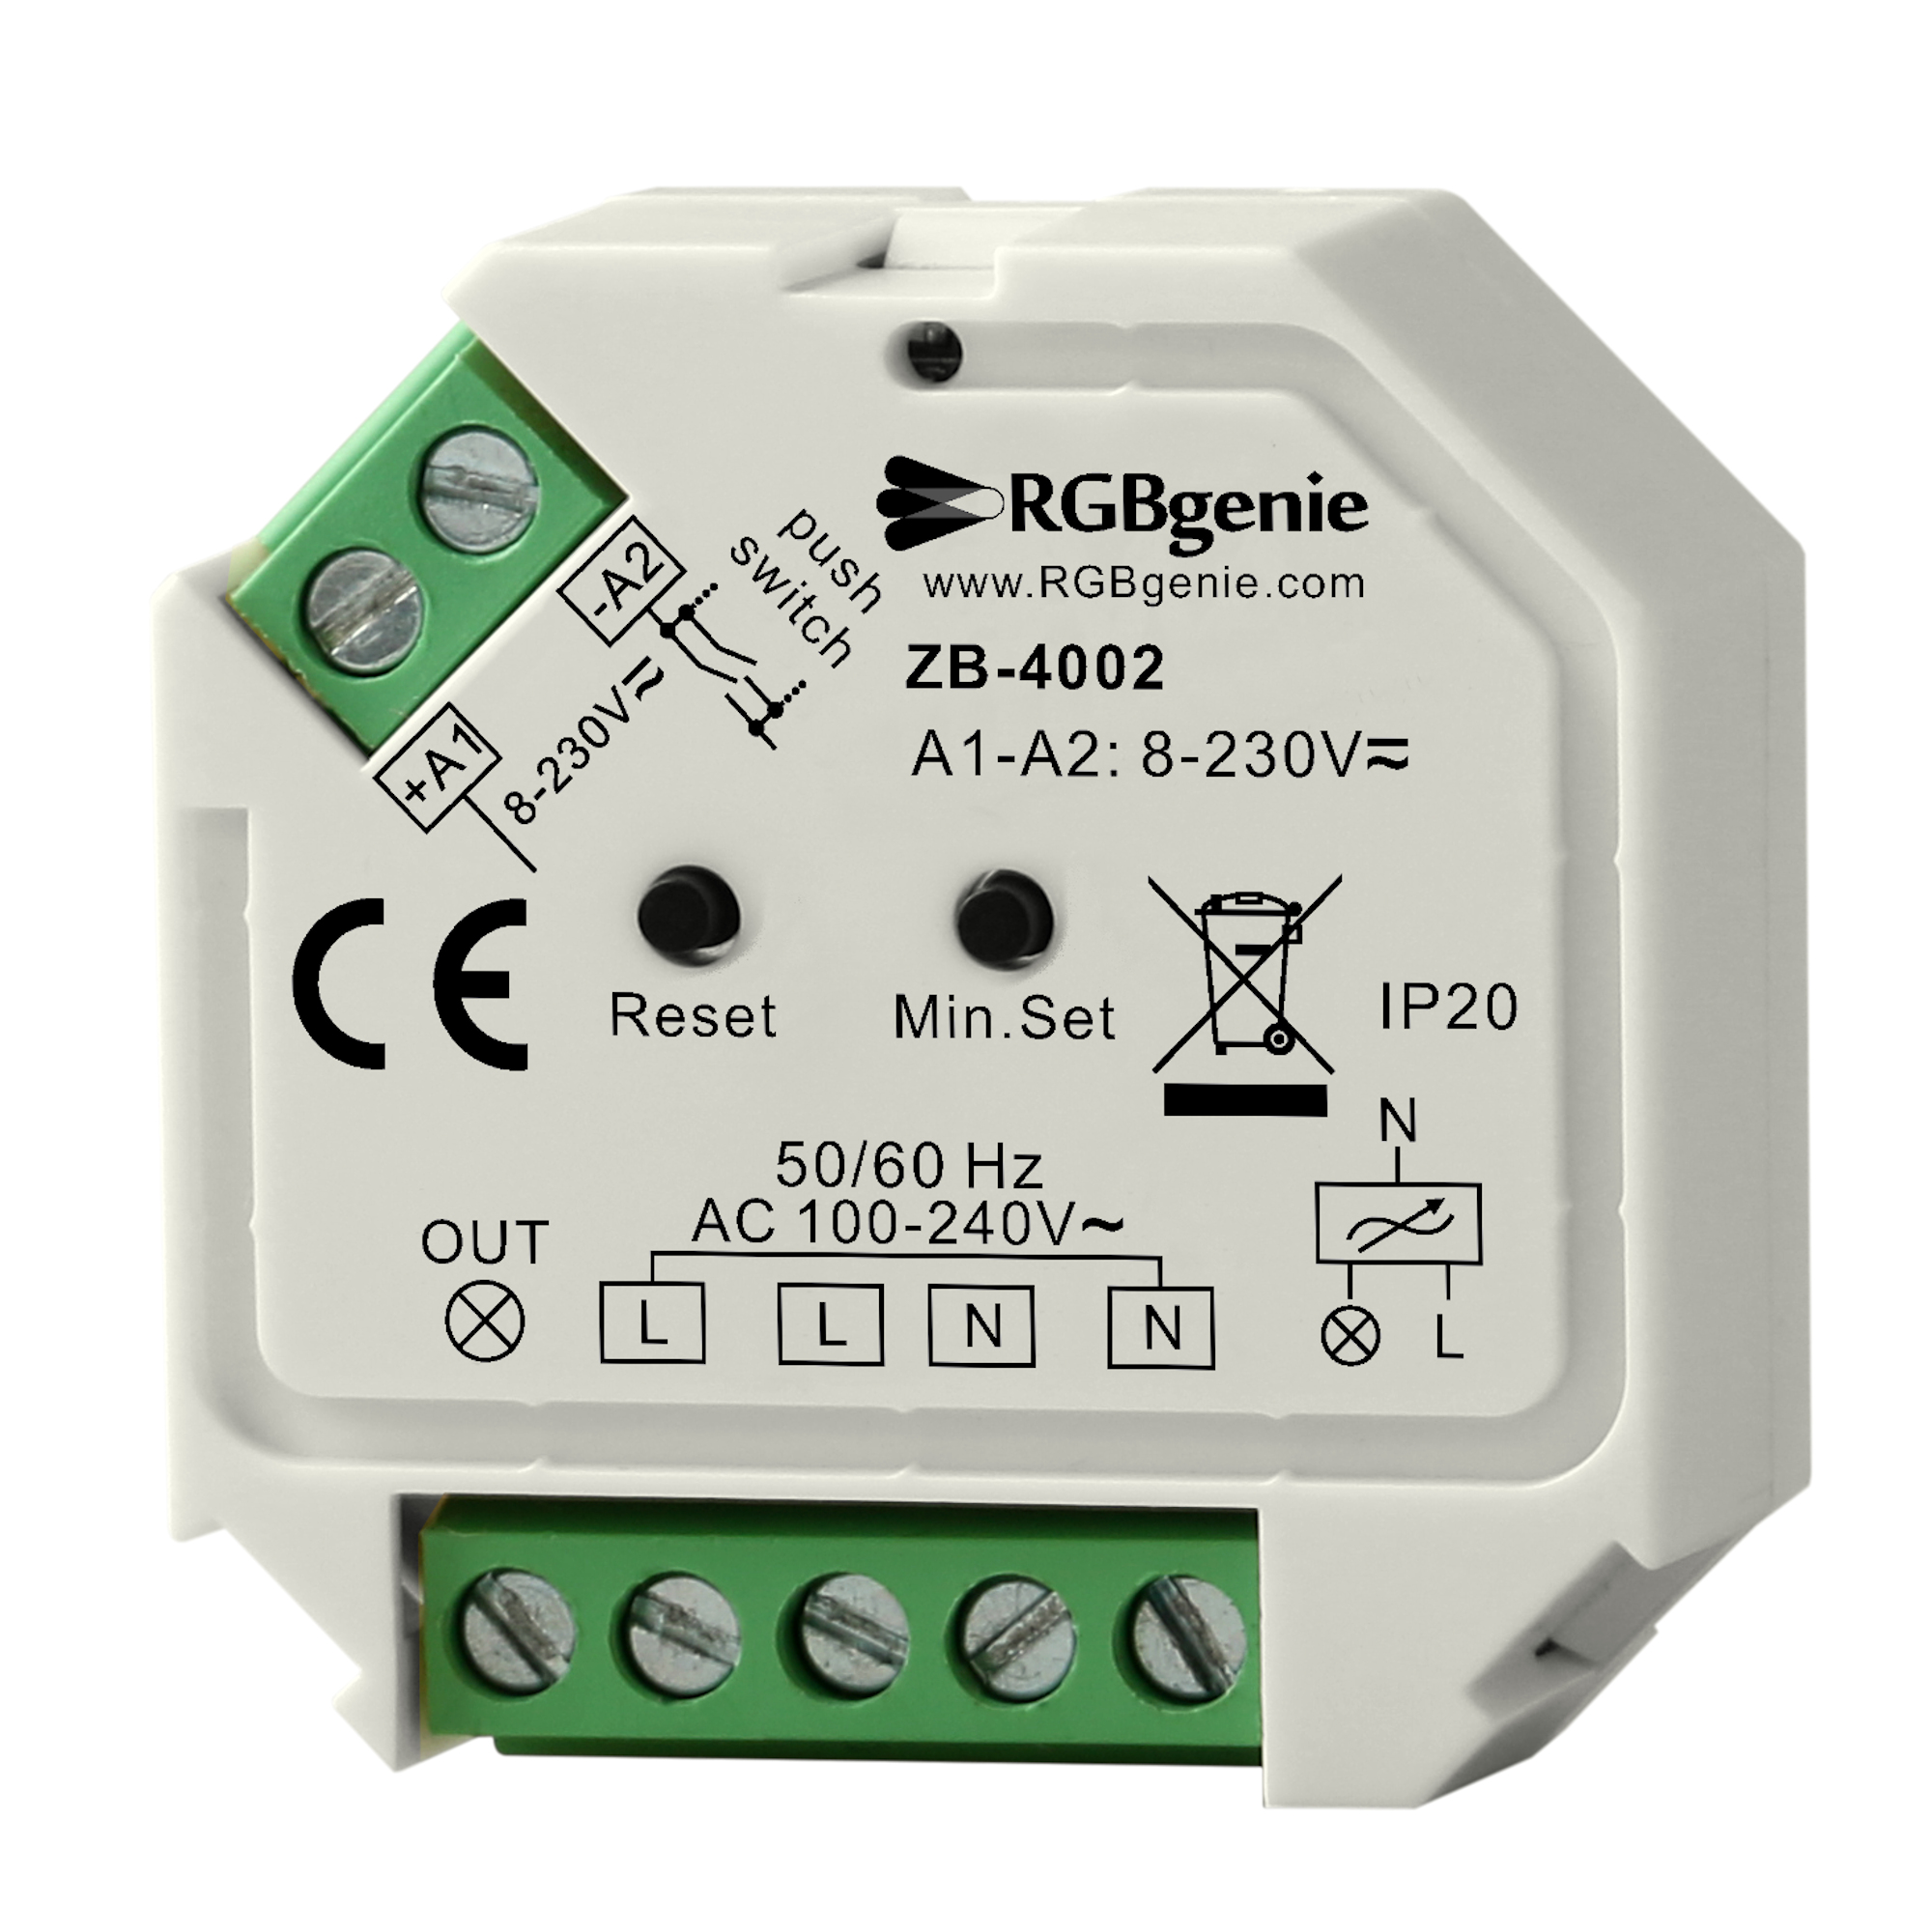 ZigBee 3.0 Light Controller Edge Dimmer Switch Home Automation for Hue Bridge 